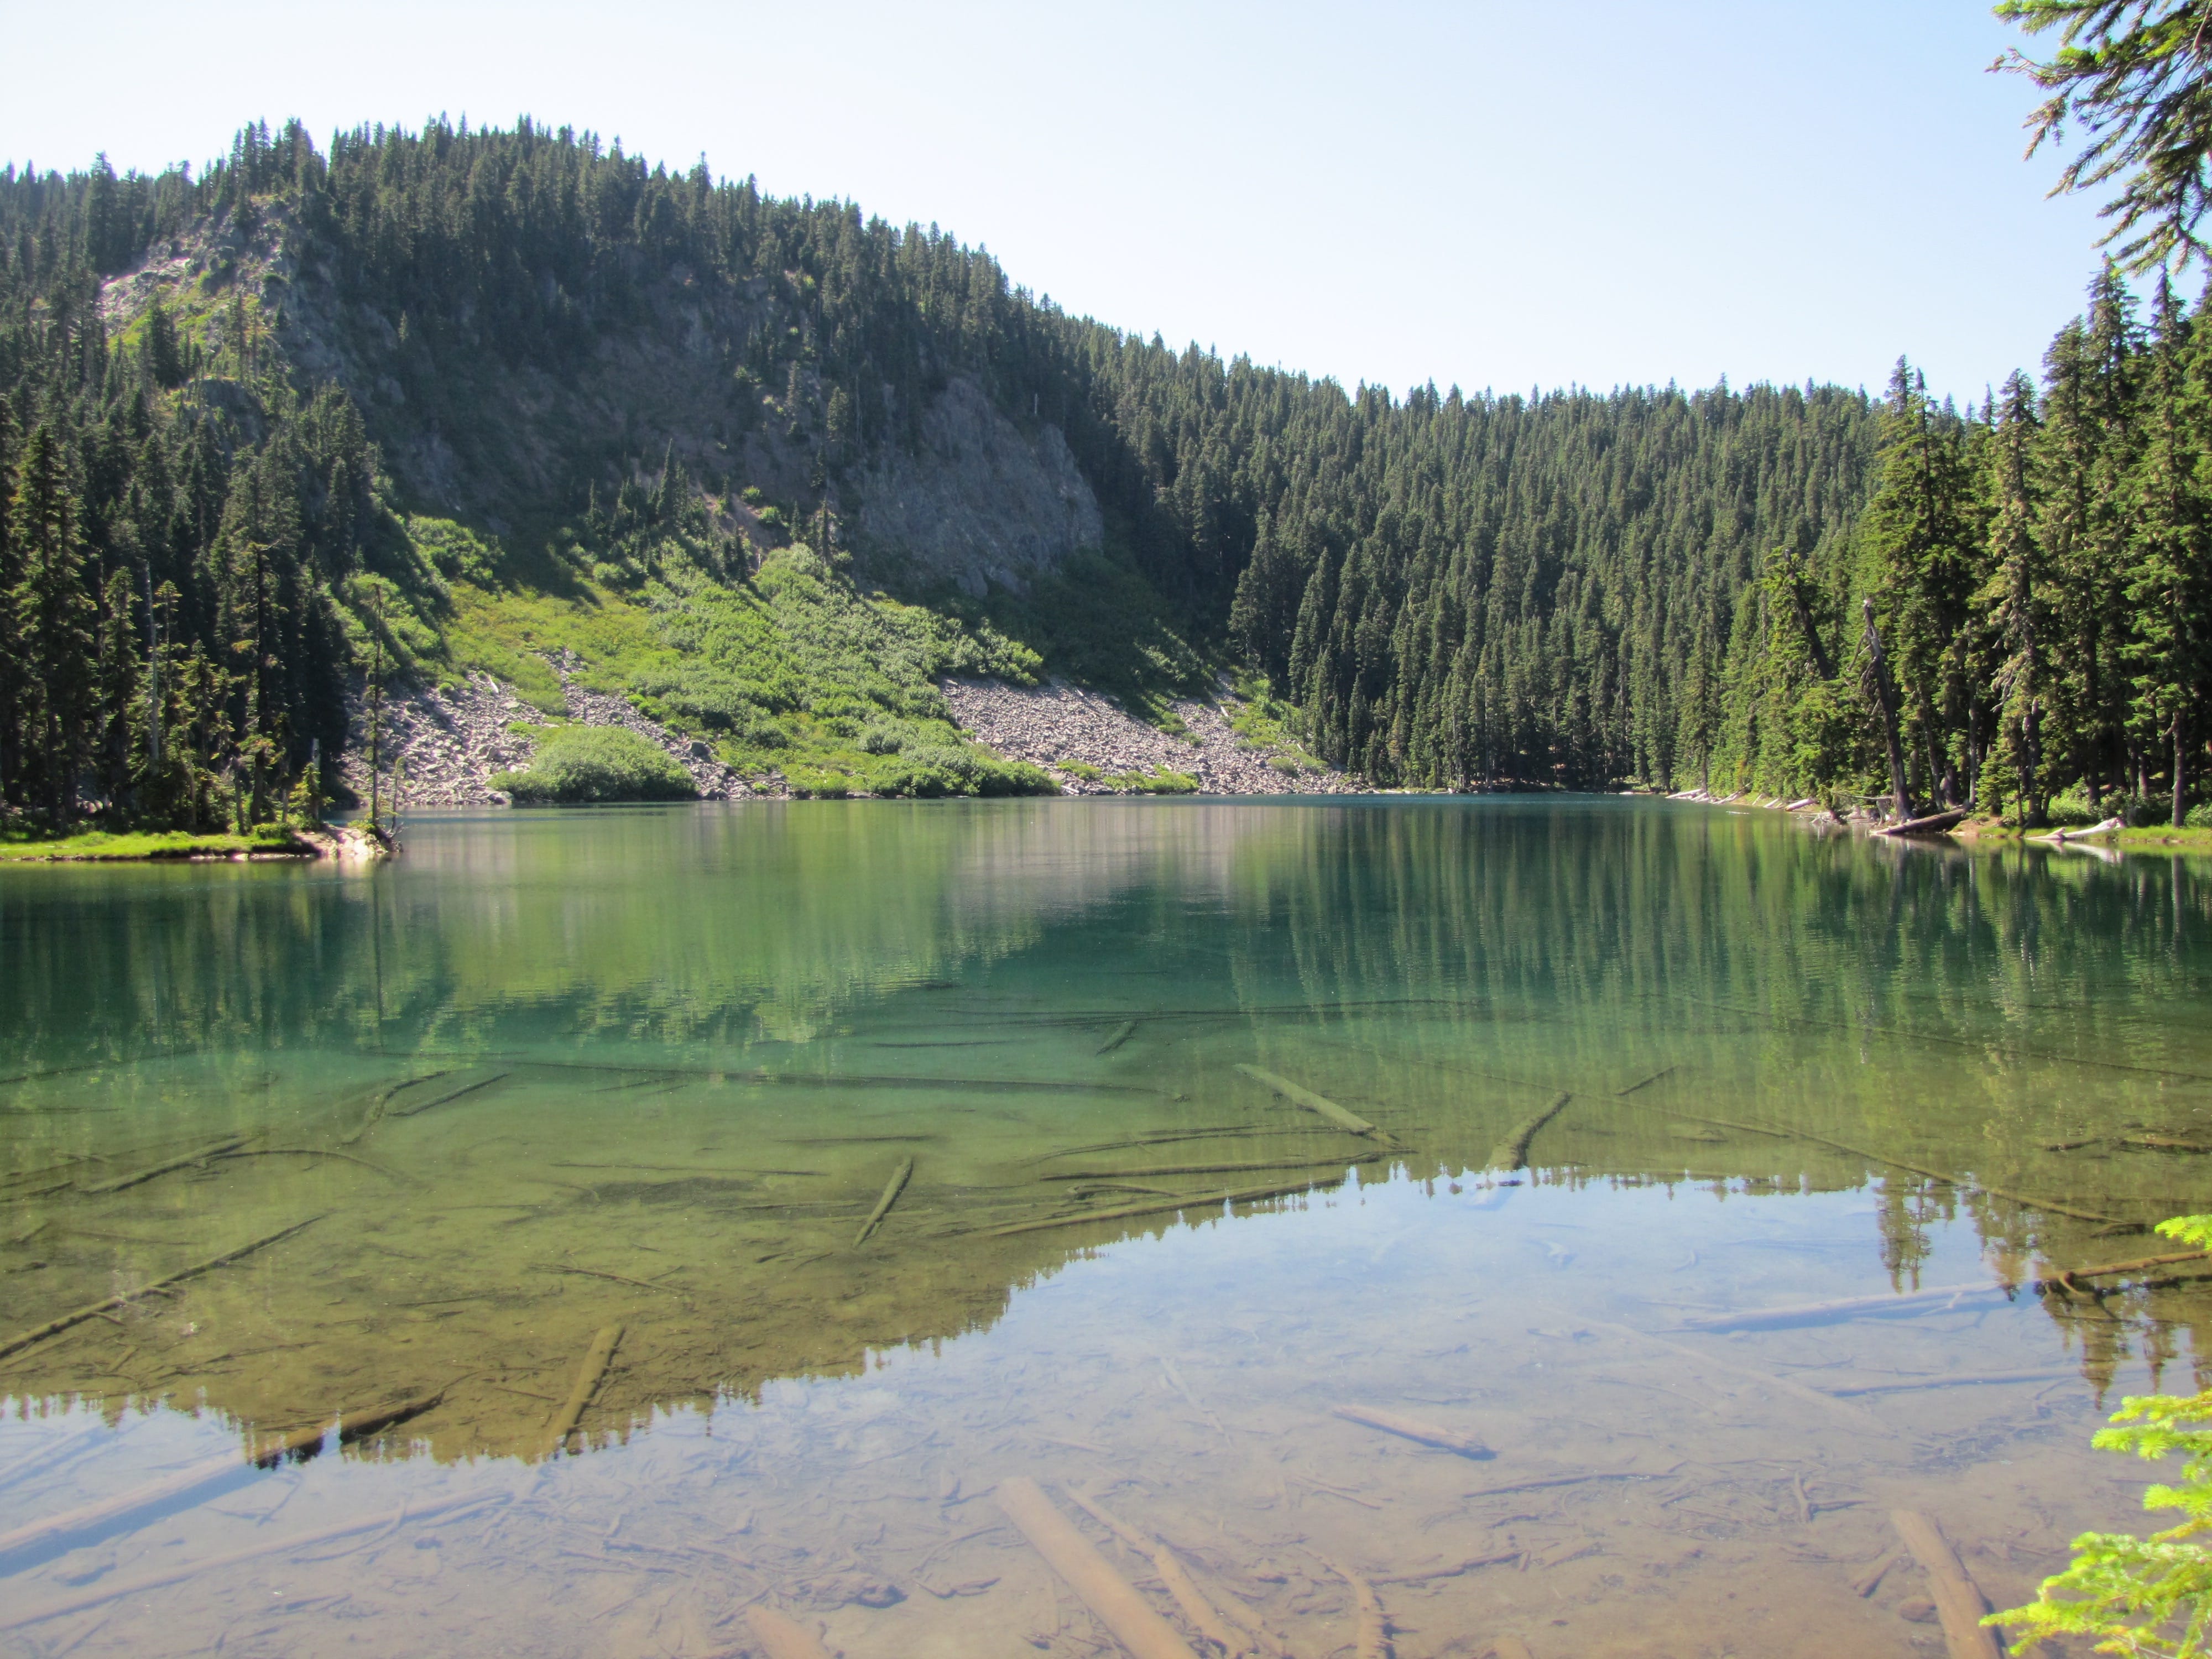 Blue Lake, at the junction of Thomas Lake trail No. 111 and the Pacific Crest National Scenic Trail No. 2000, is among the most popular destinations in Indian Heaven Wilderness.